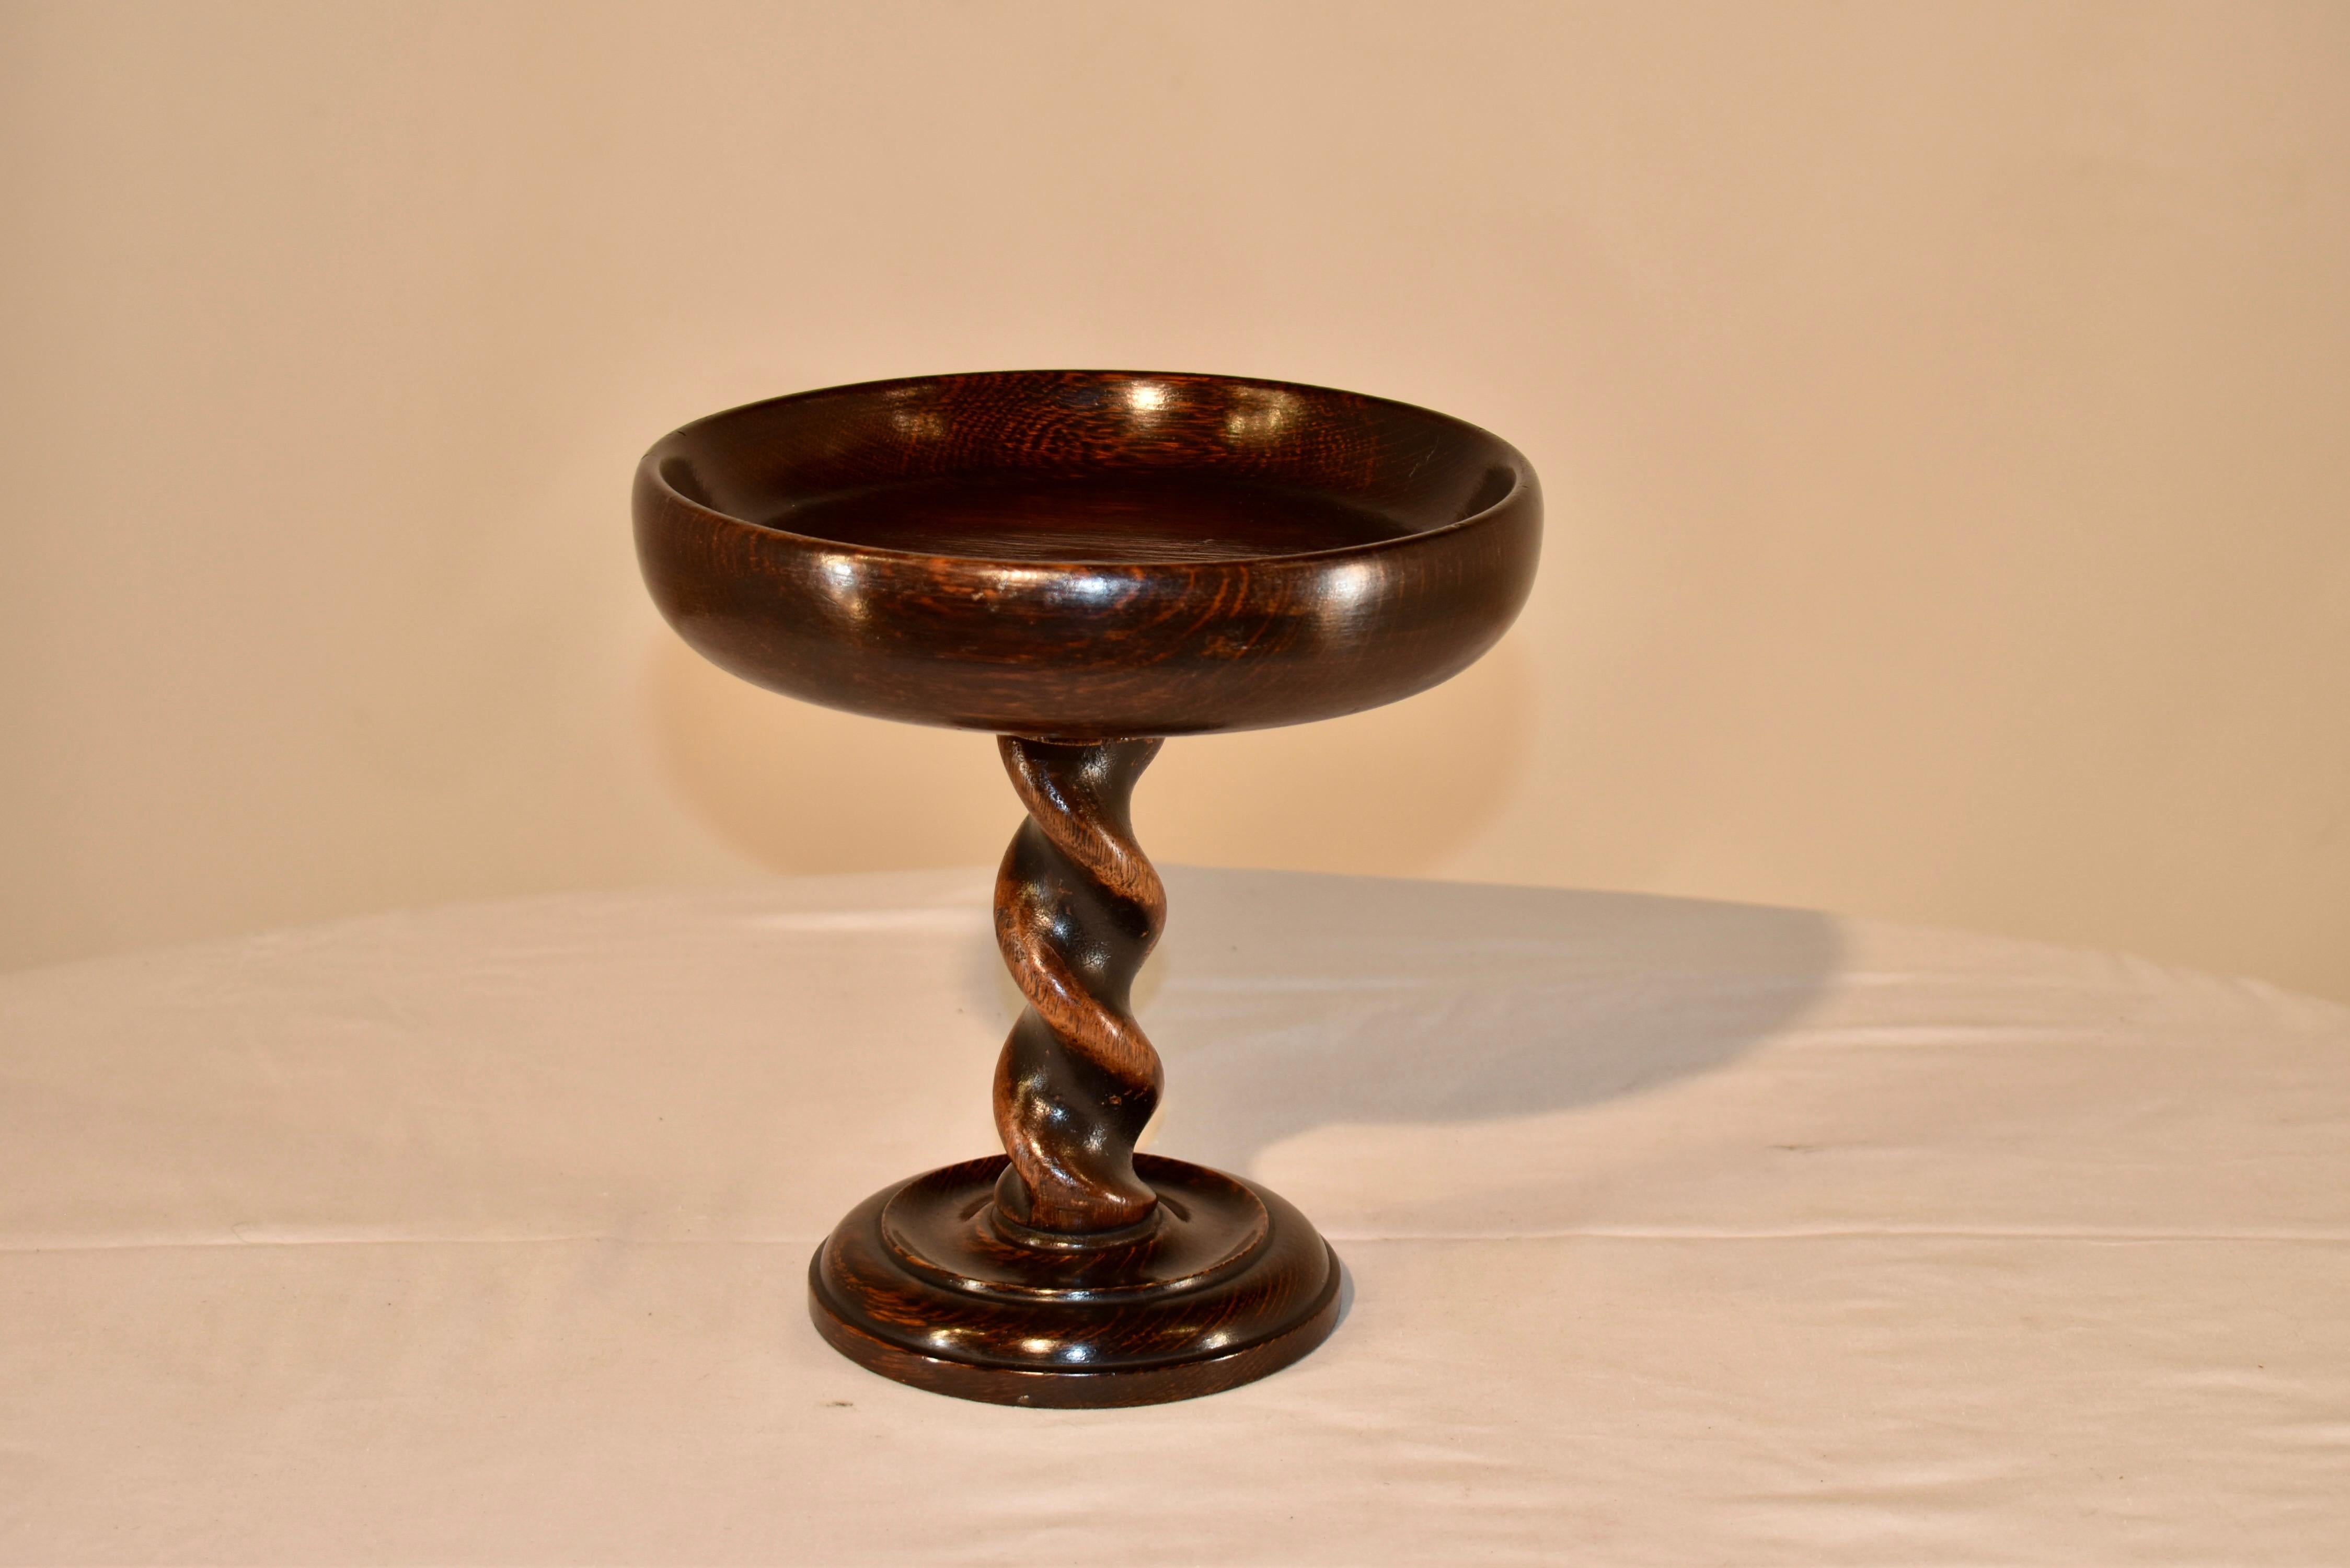 19th century oak compote from England with a nicely turned dish, supported on top of a thickly hand turned barley twist stem and resting on a hand turned and routed base. Gorgeous height and proportion.